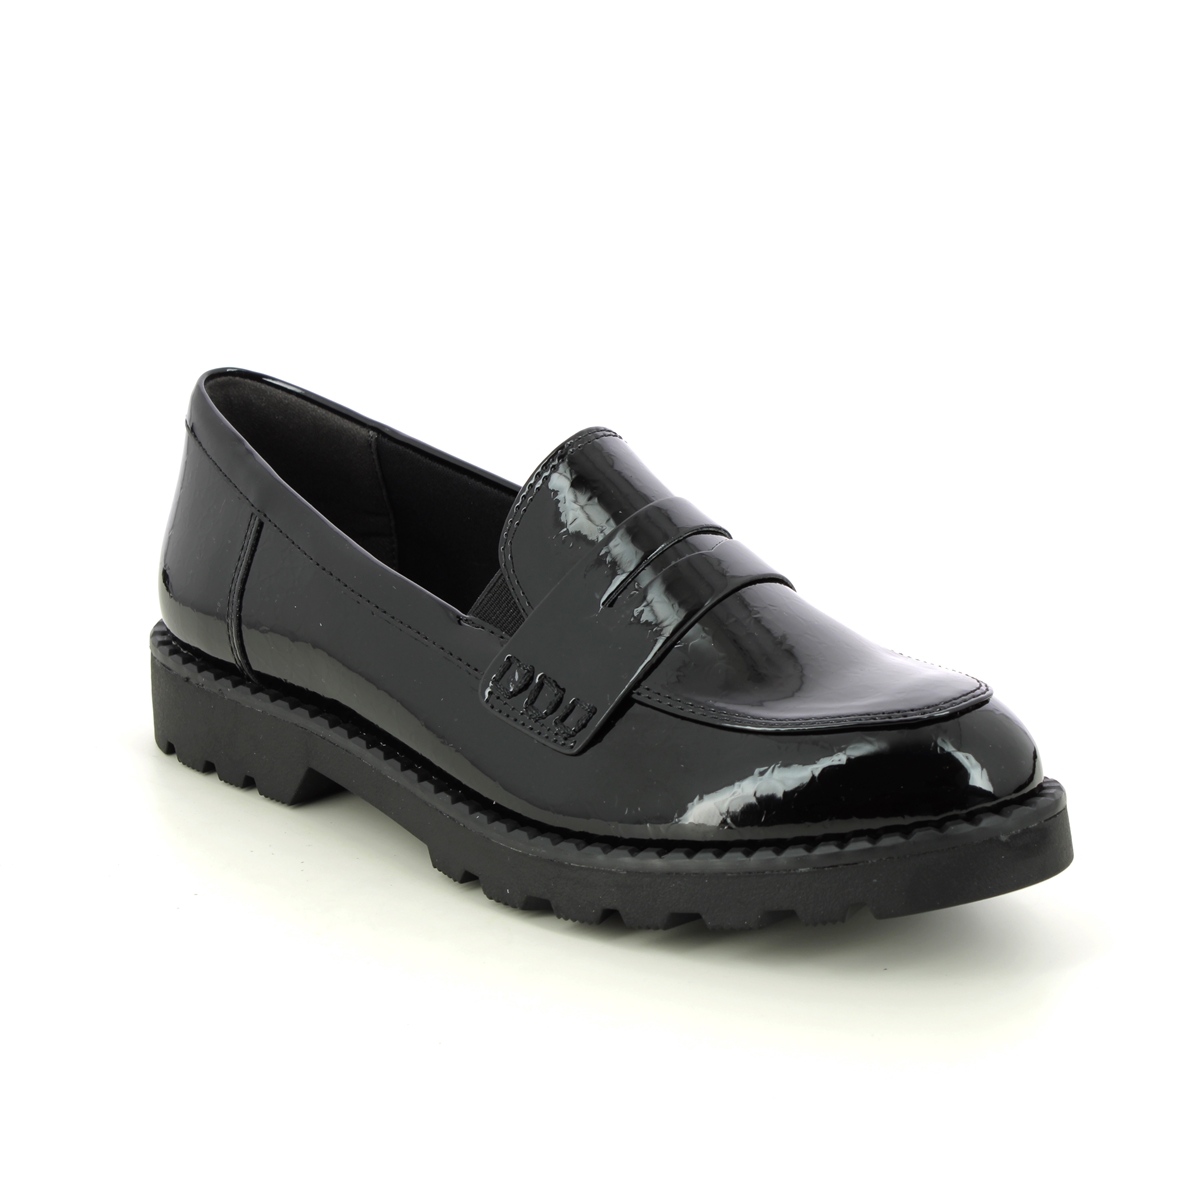 Tamaris Crissy 25 Black Patent Womens Loafers 24312-29-063 In Size 35 In Plain Black Patent